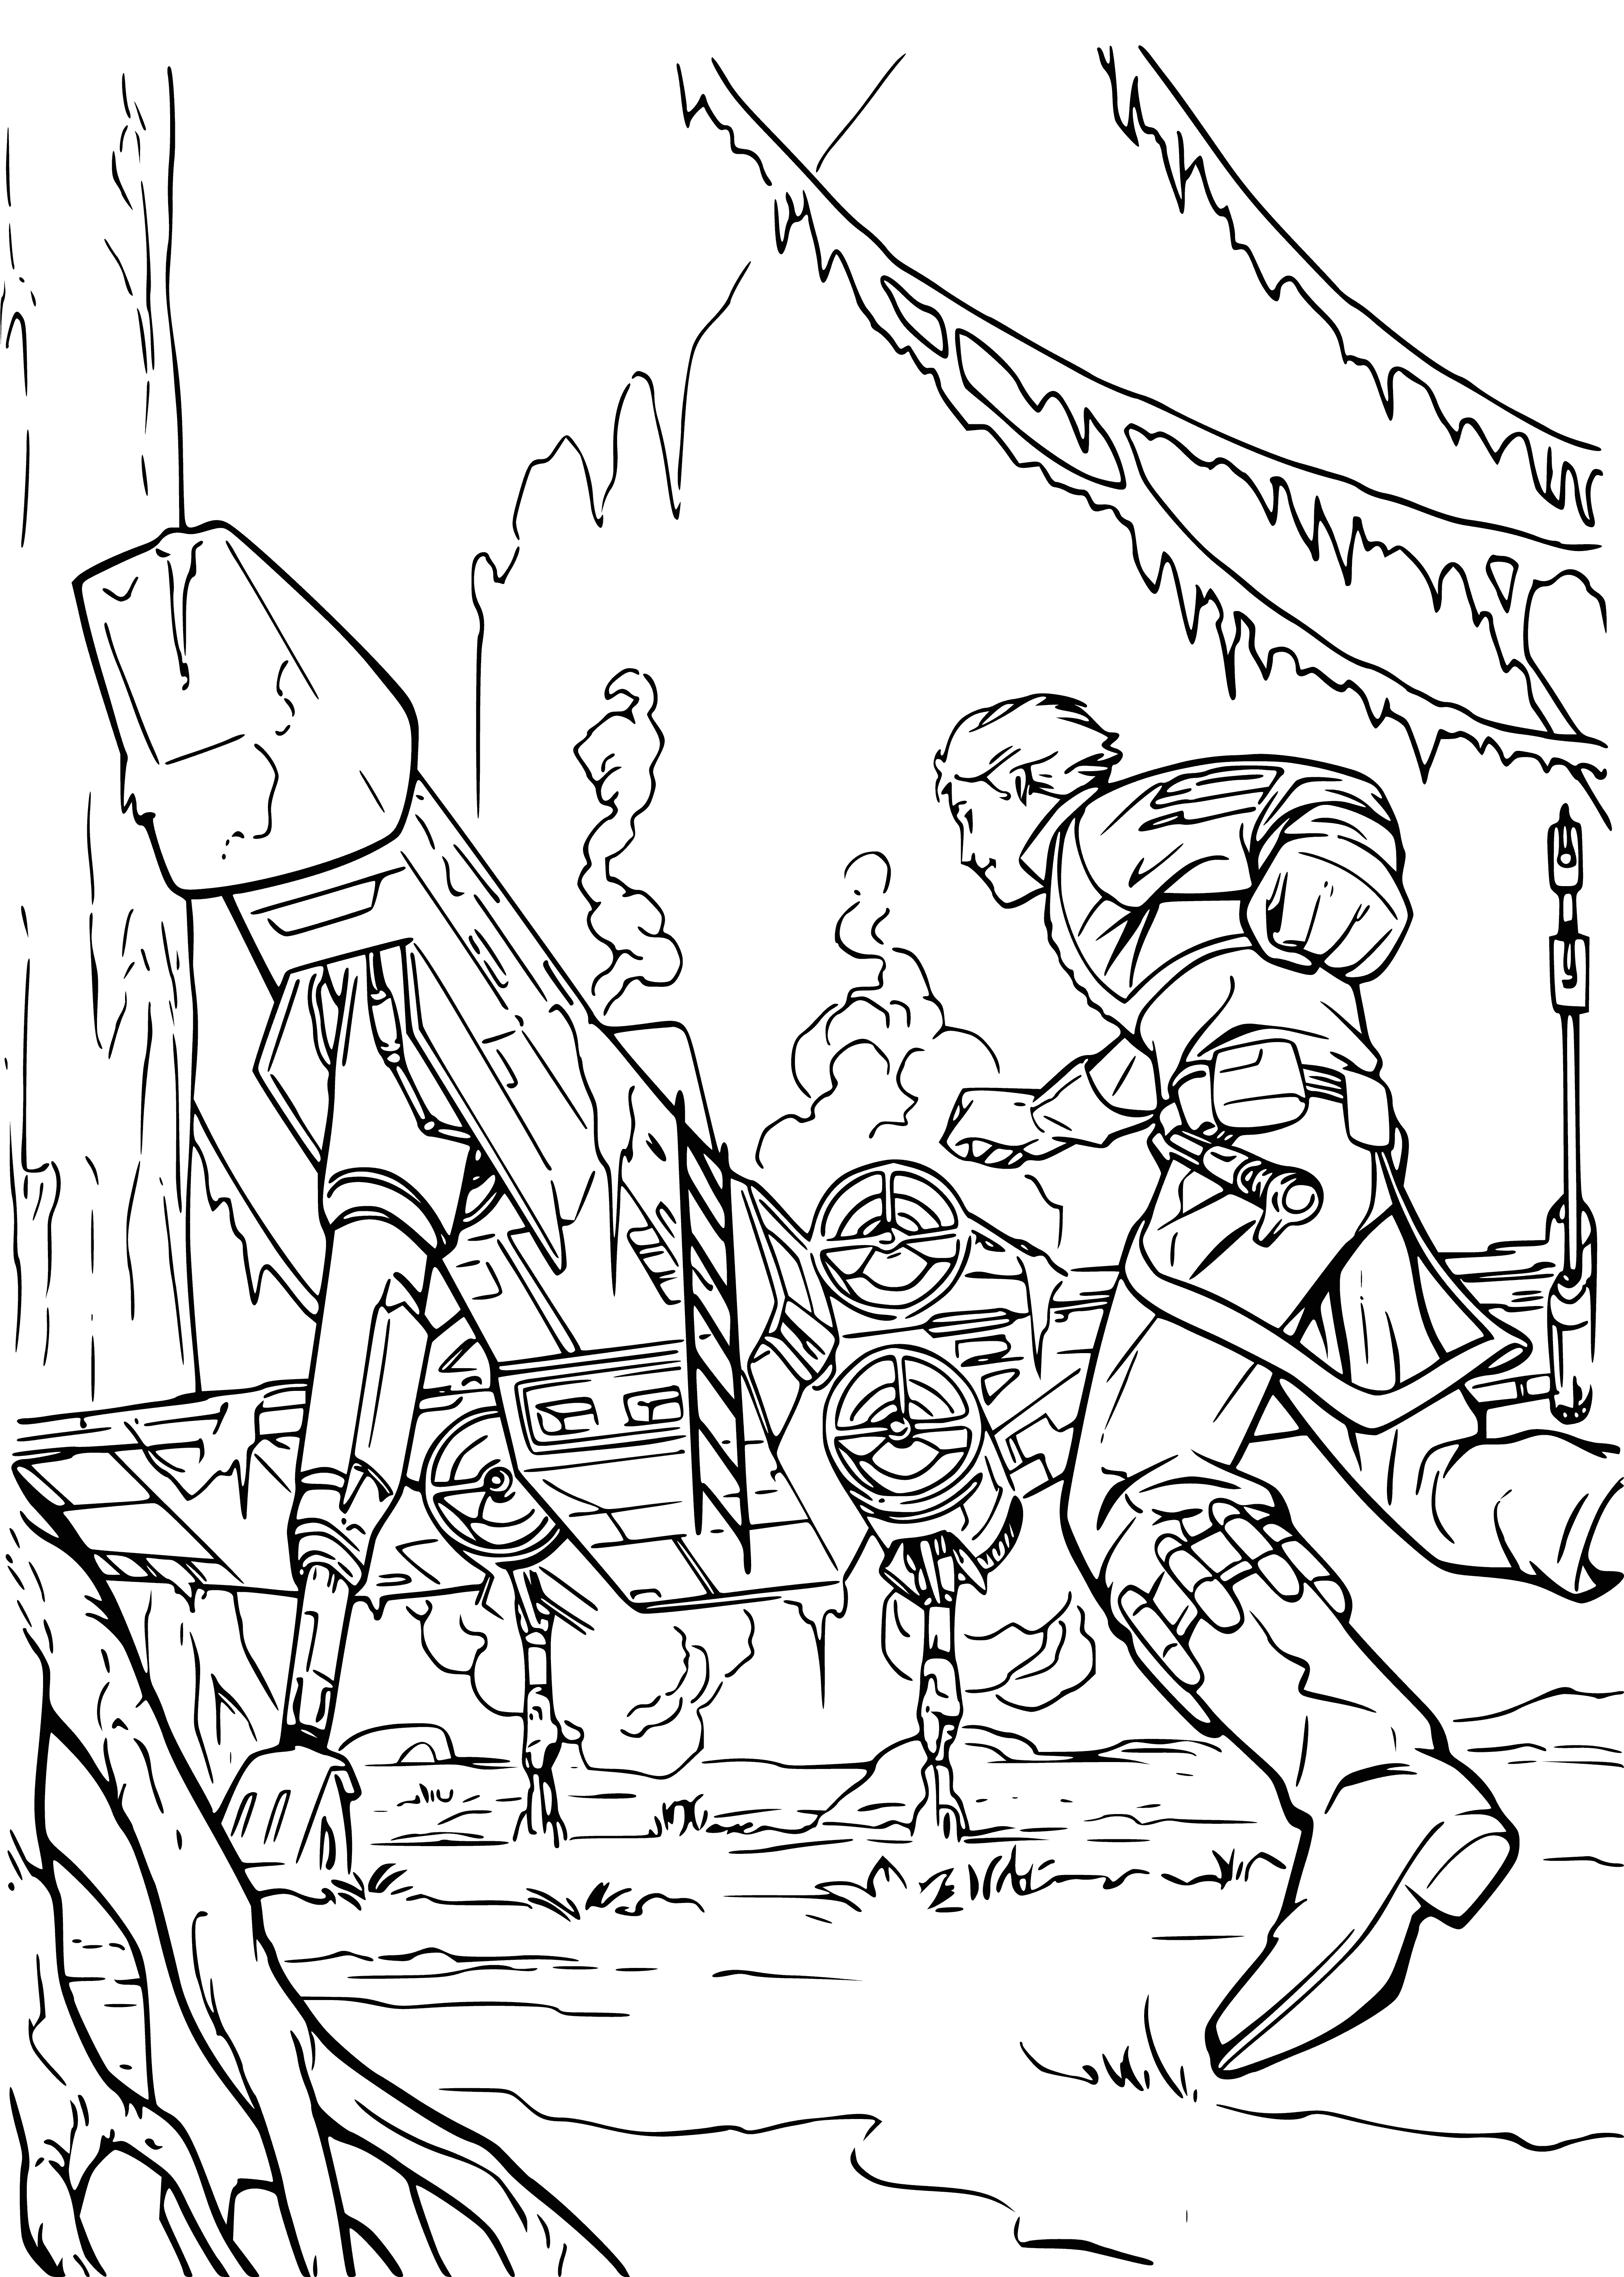 Luke runs to the spaceship coloring page